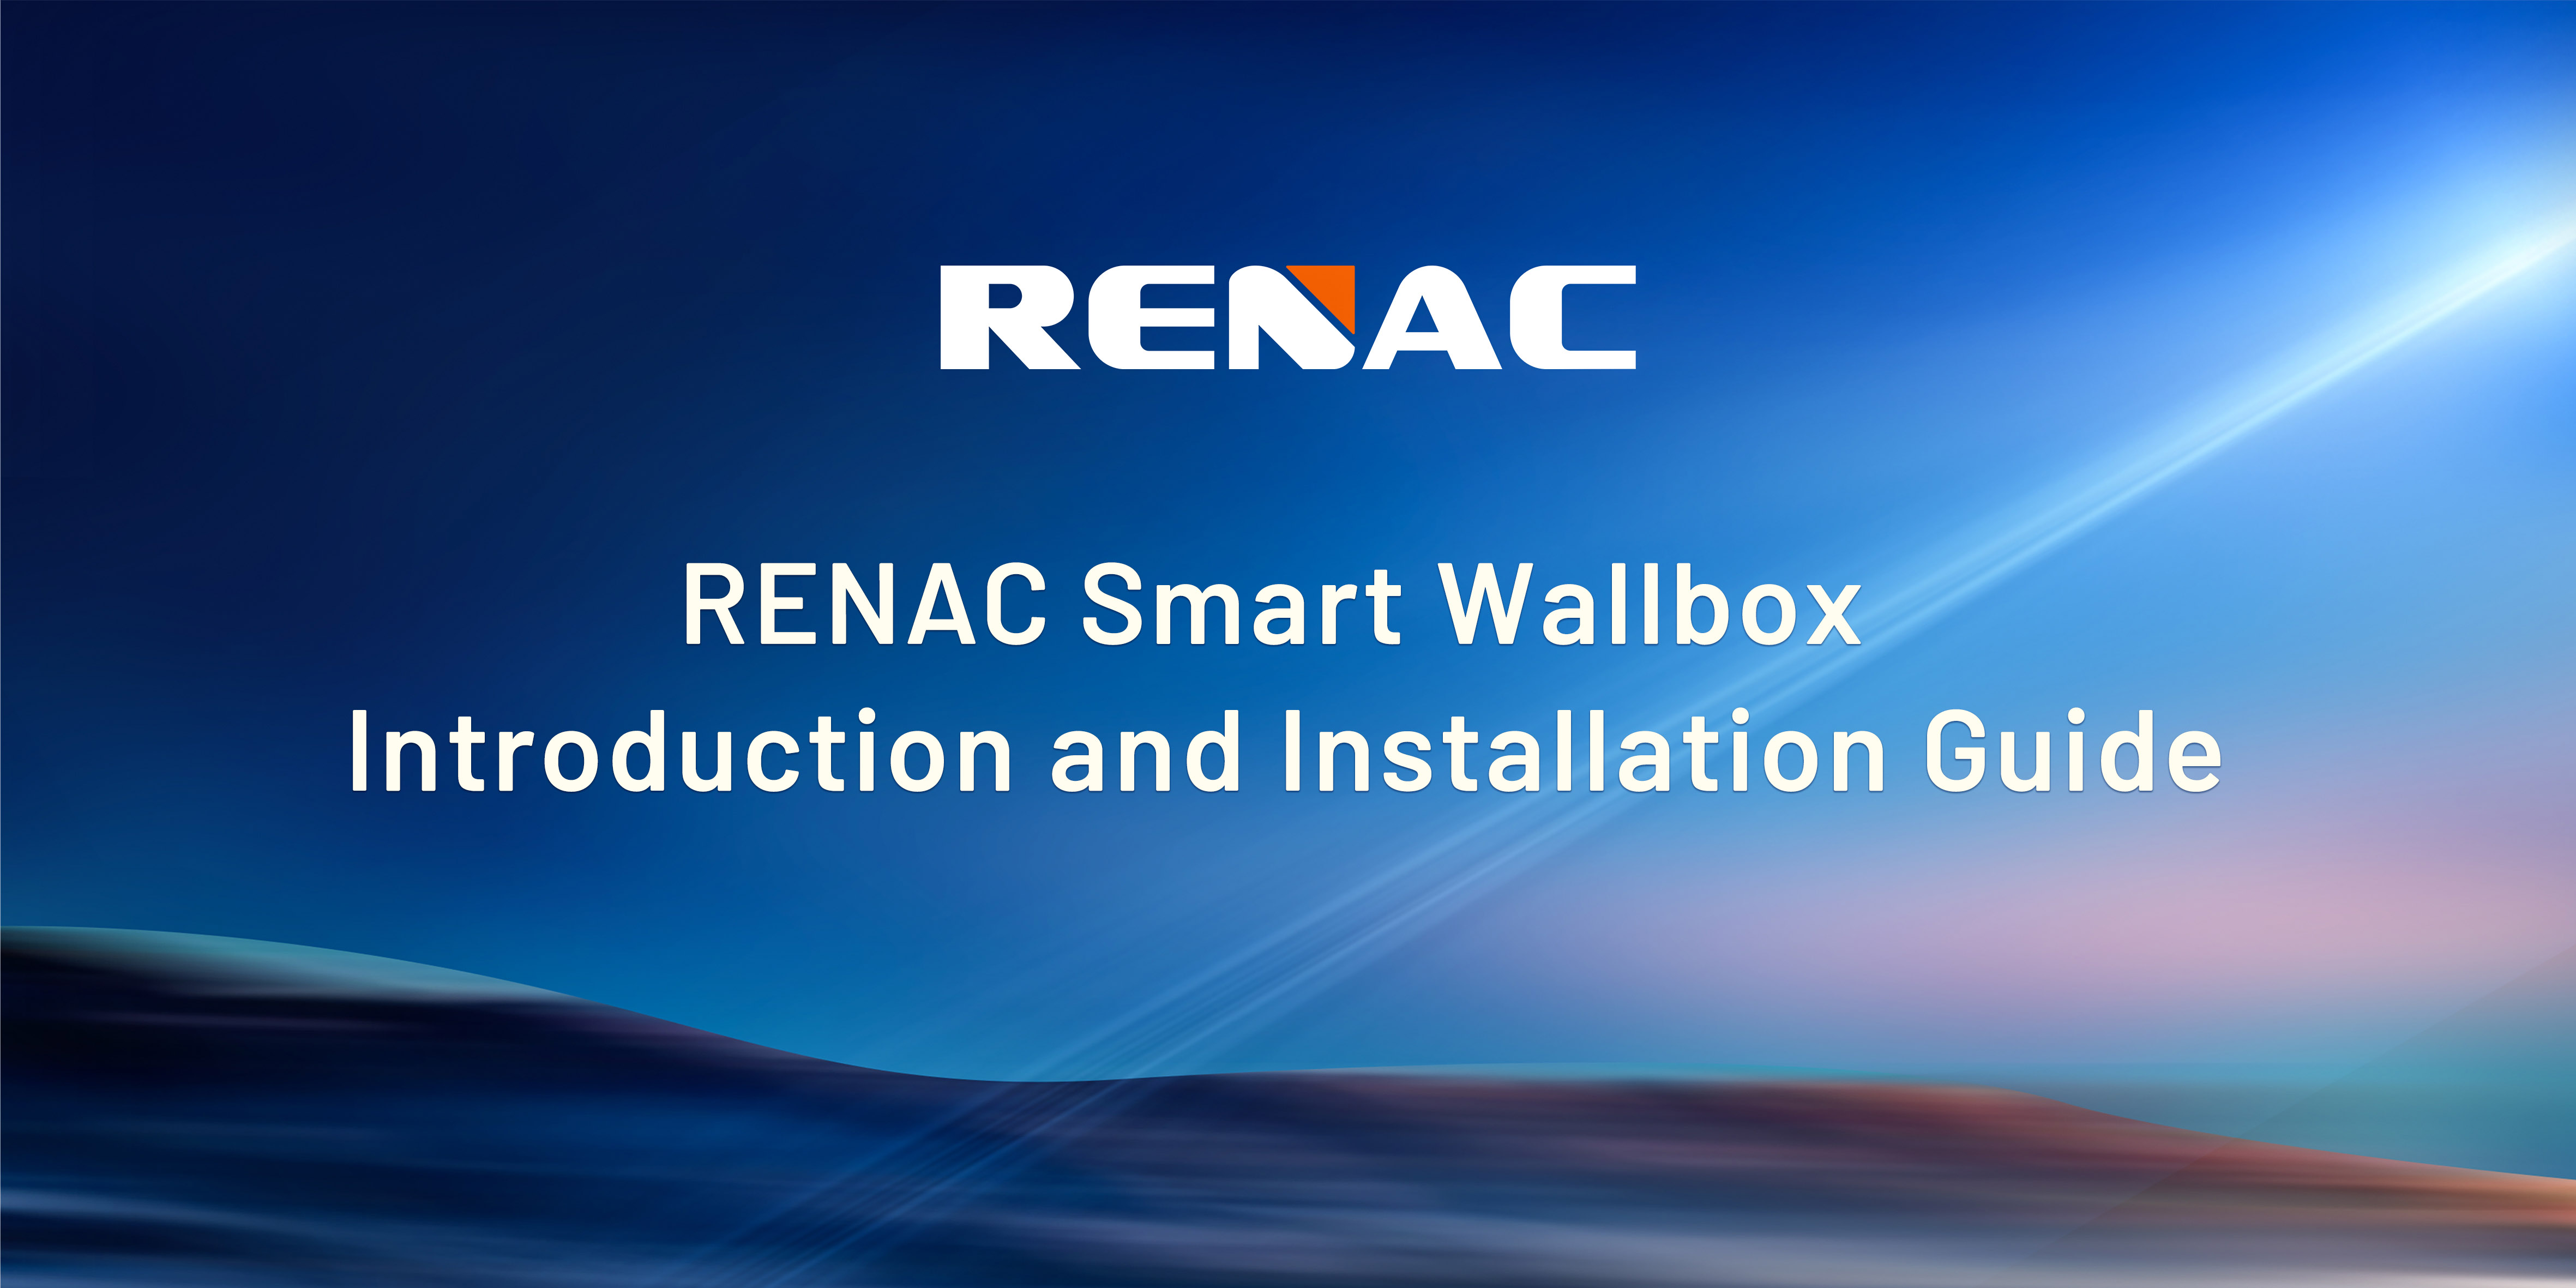 RENAC Smart Wallbox Introduction and Installation Guide